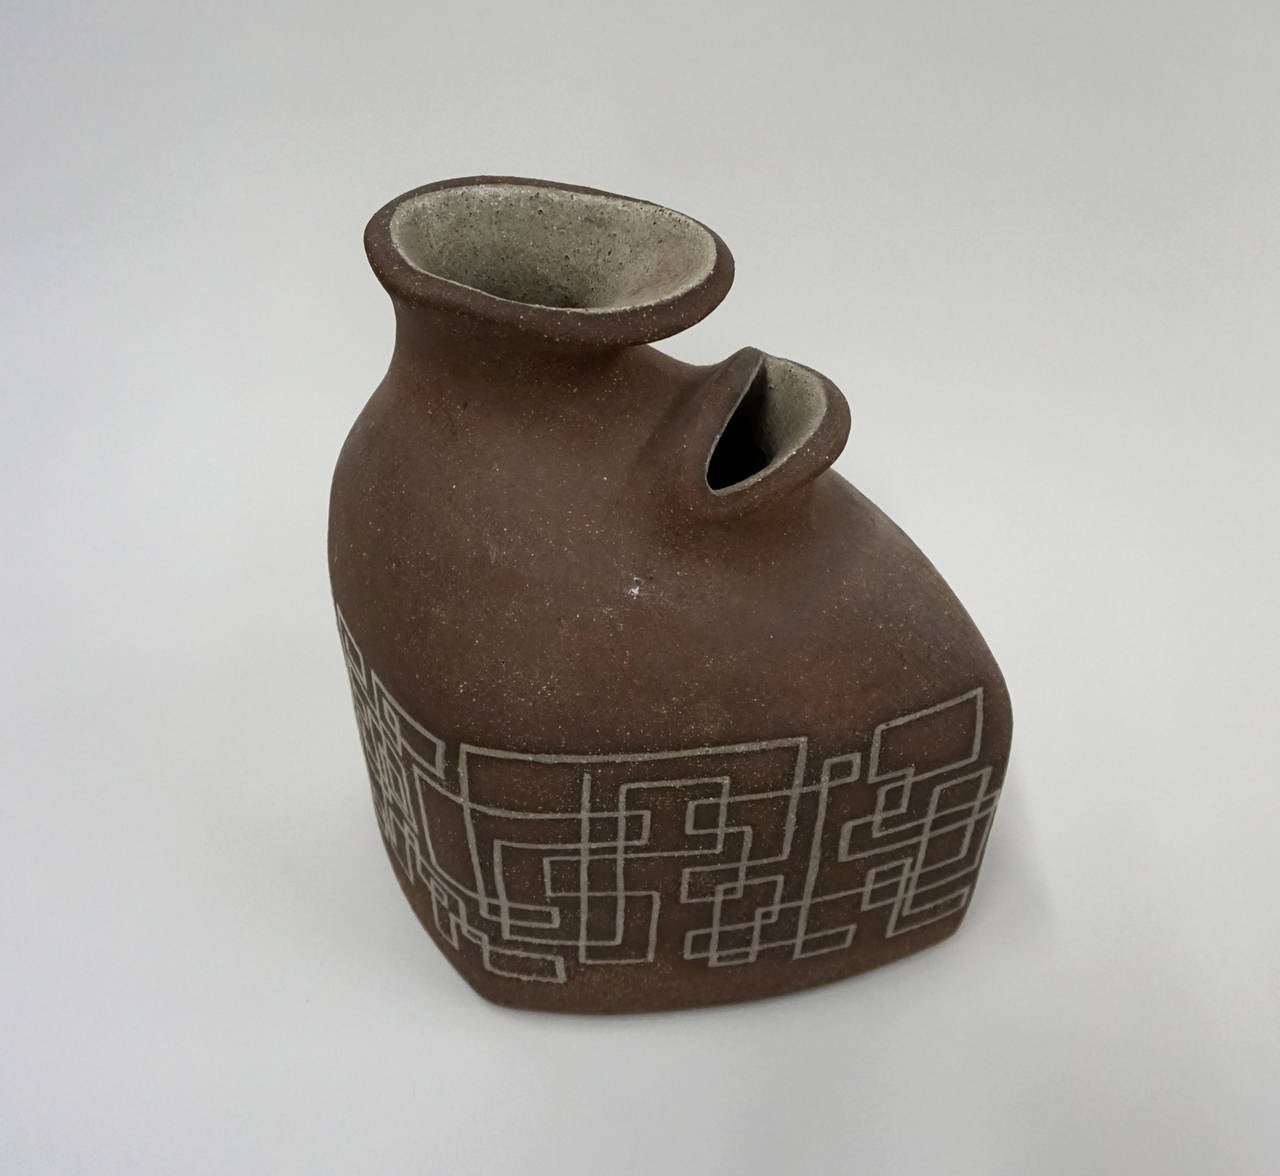 American 1950s Dual Mouth Ceramic Vessel with Geometric Design